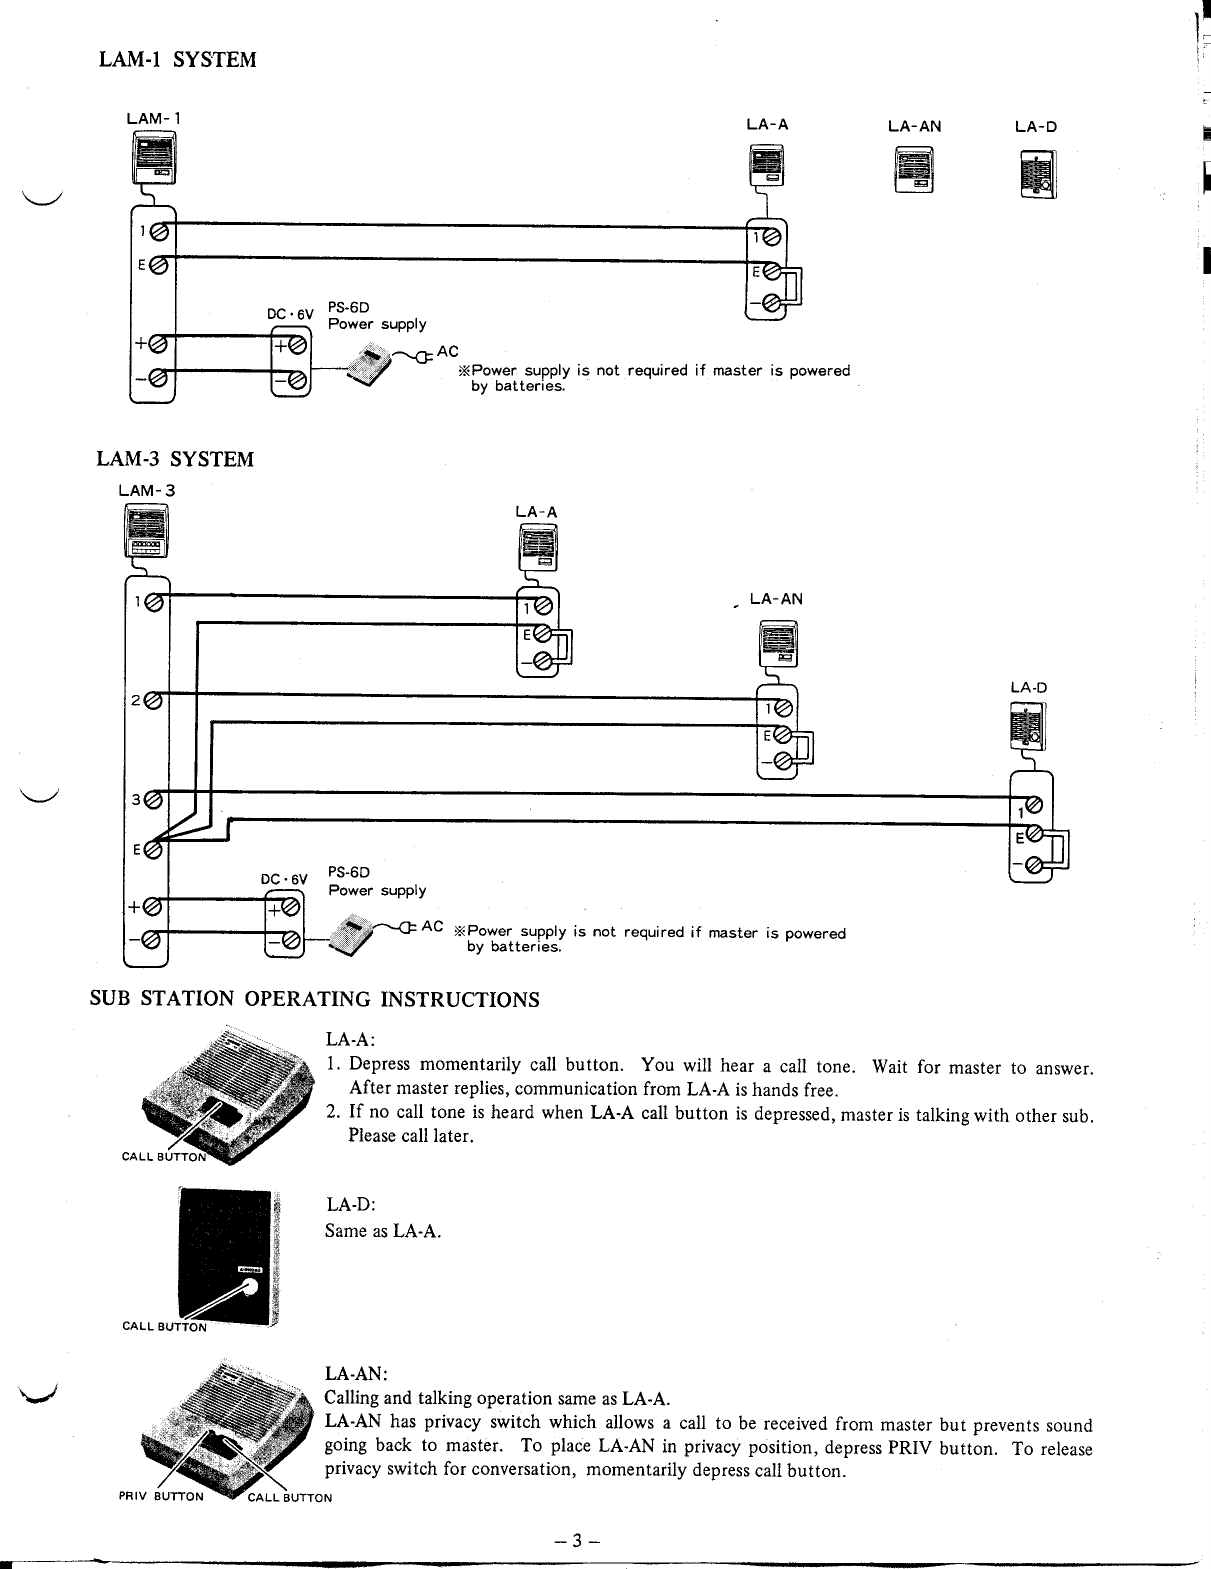 Page 3 of 4 - Aiphone LAM-3 User Manual  To The 93676d8d-2ada-44b3-90bc-8764d76a7e35